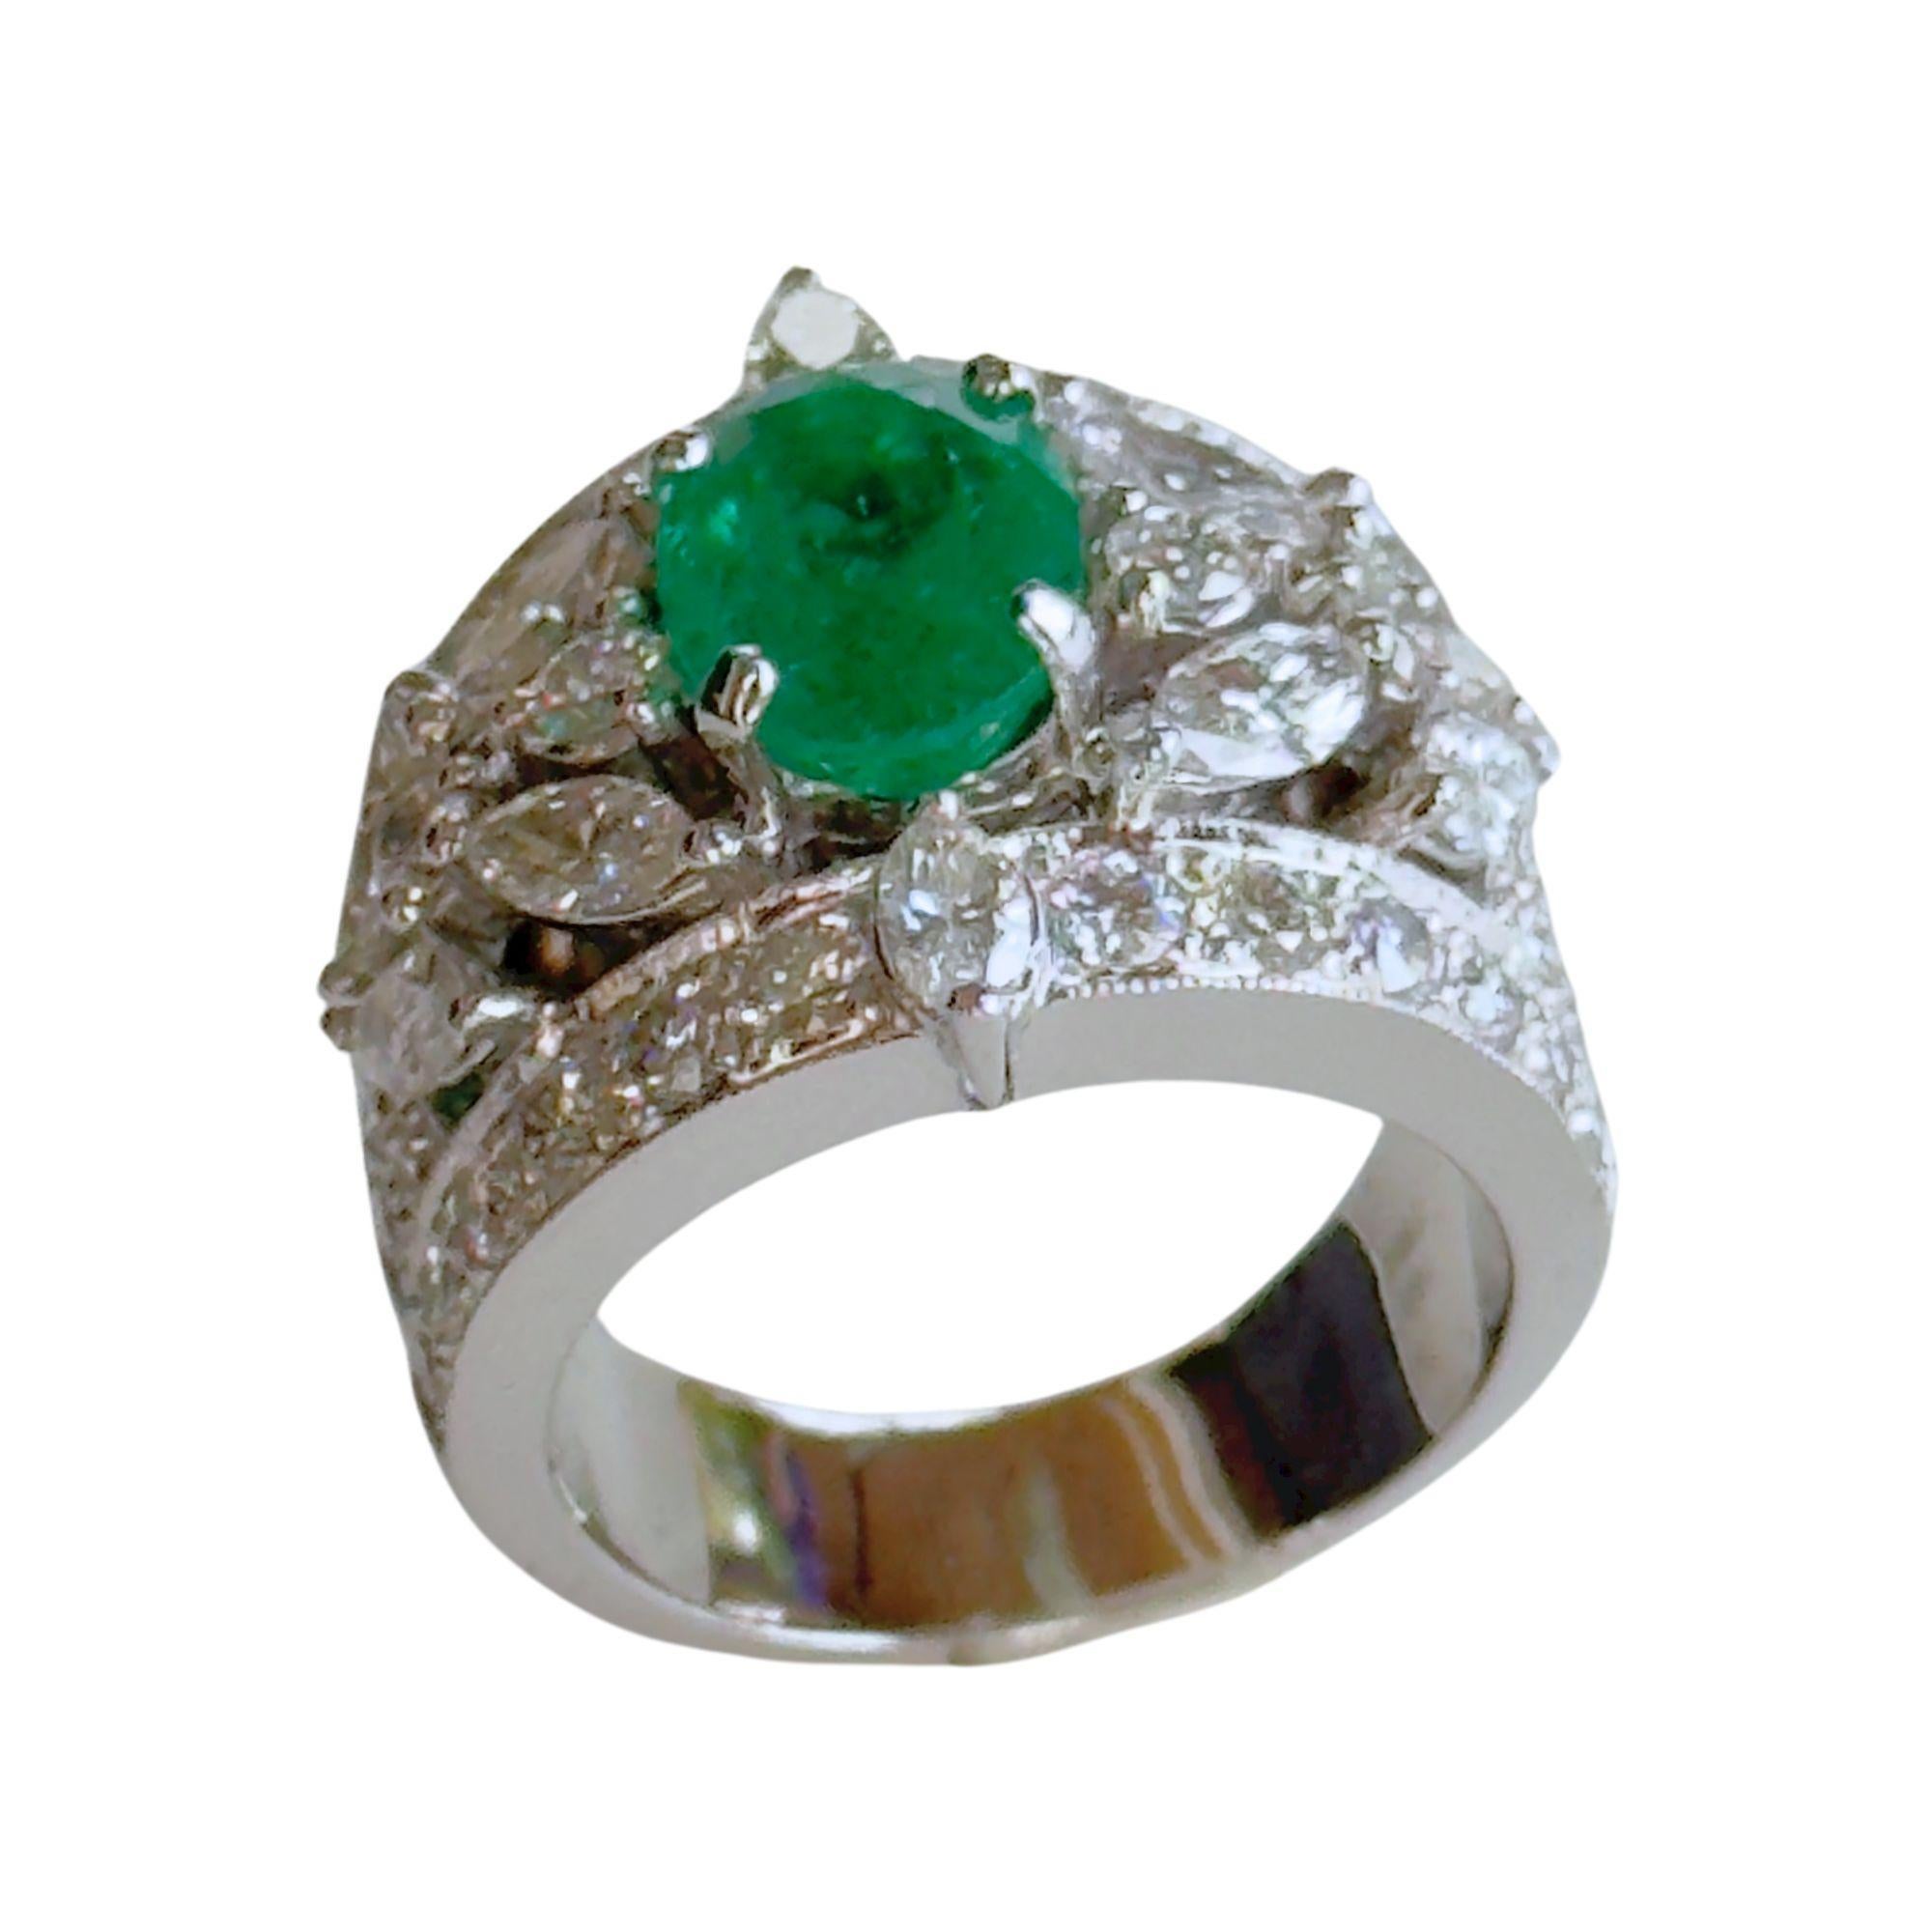 18k White Diamond and Emerald Ring. Expertly crafted with a remarkable balance of luxury and elegance, this 18k white Diamond and emerald ring features dazzling 3.7 carats of diamonds and a stunning 2.95 carat emerald. Its substantial 12.2 gram